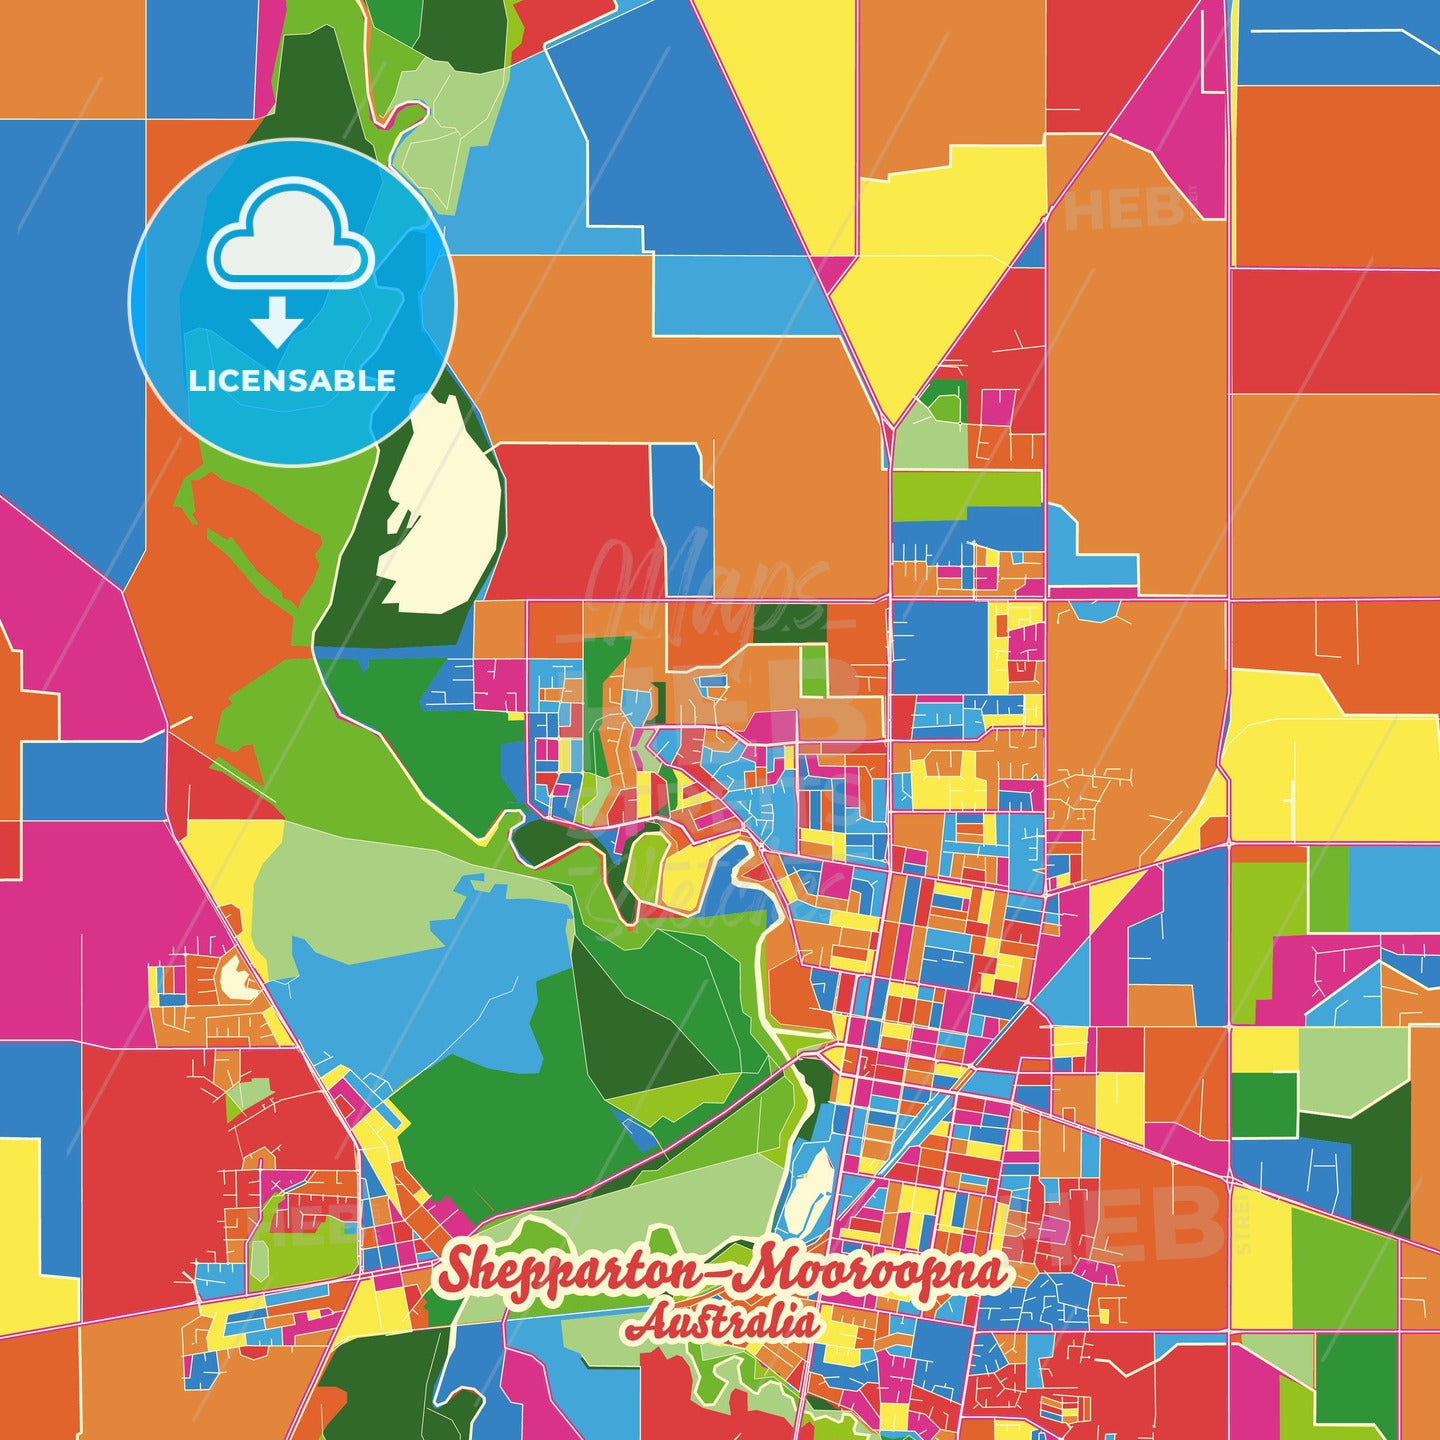 Shepparton–Mooroopna, Australia Crazy Colorful Street Map Poster Template - HEBSTREITS Sketches